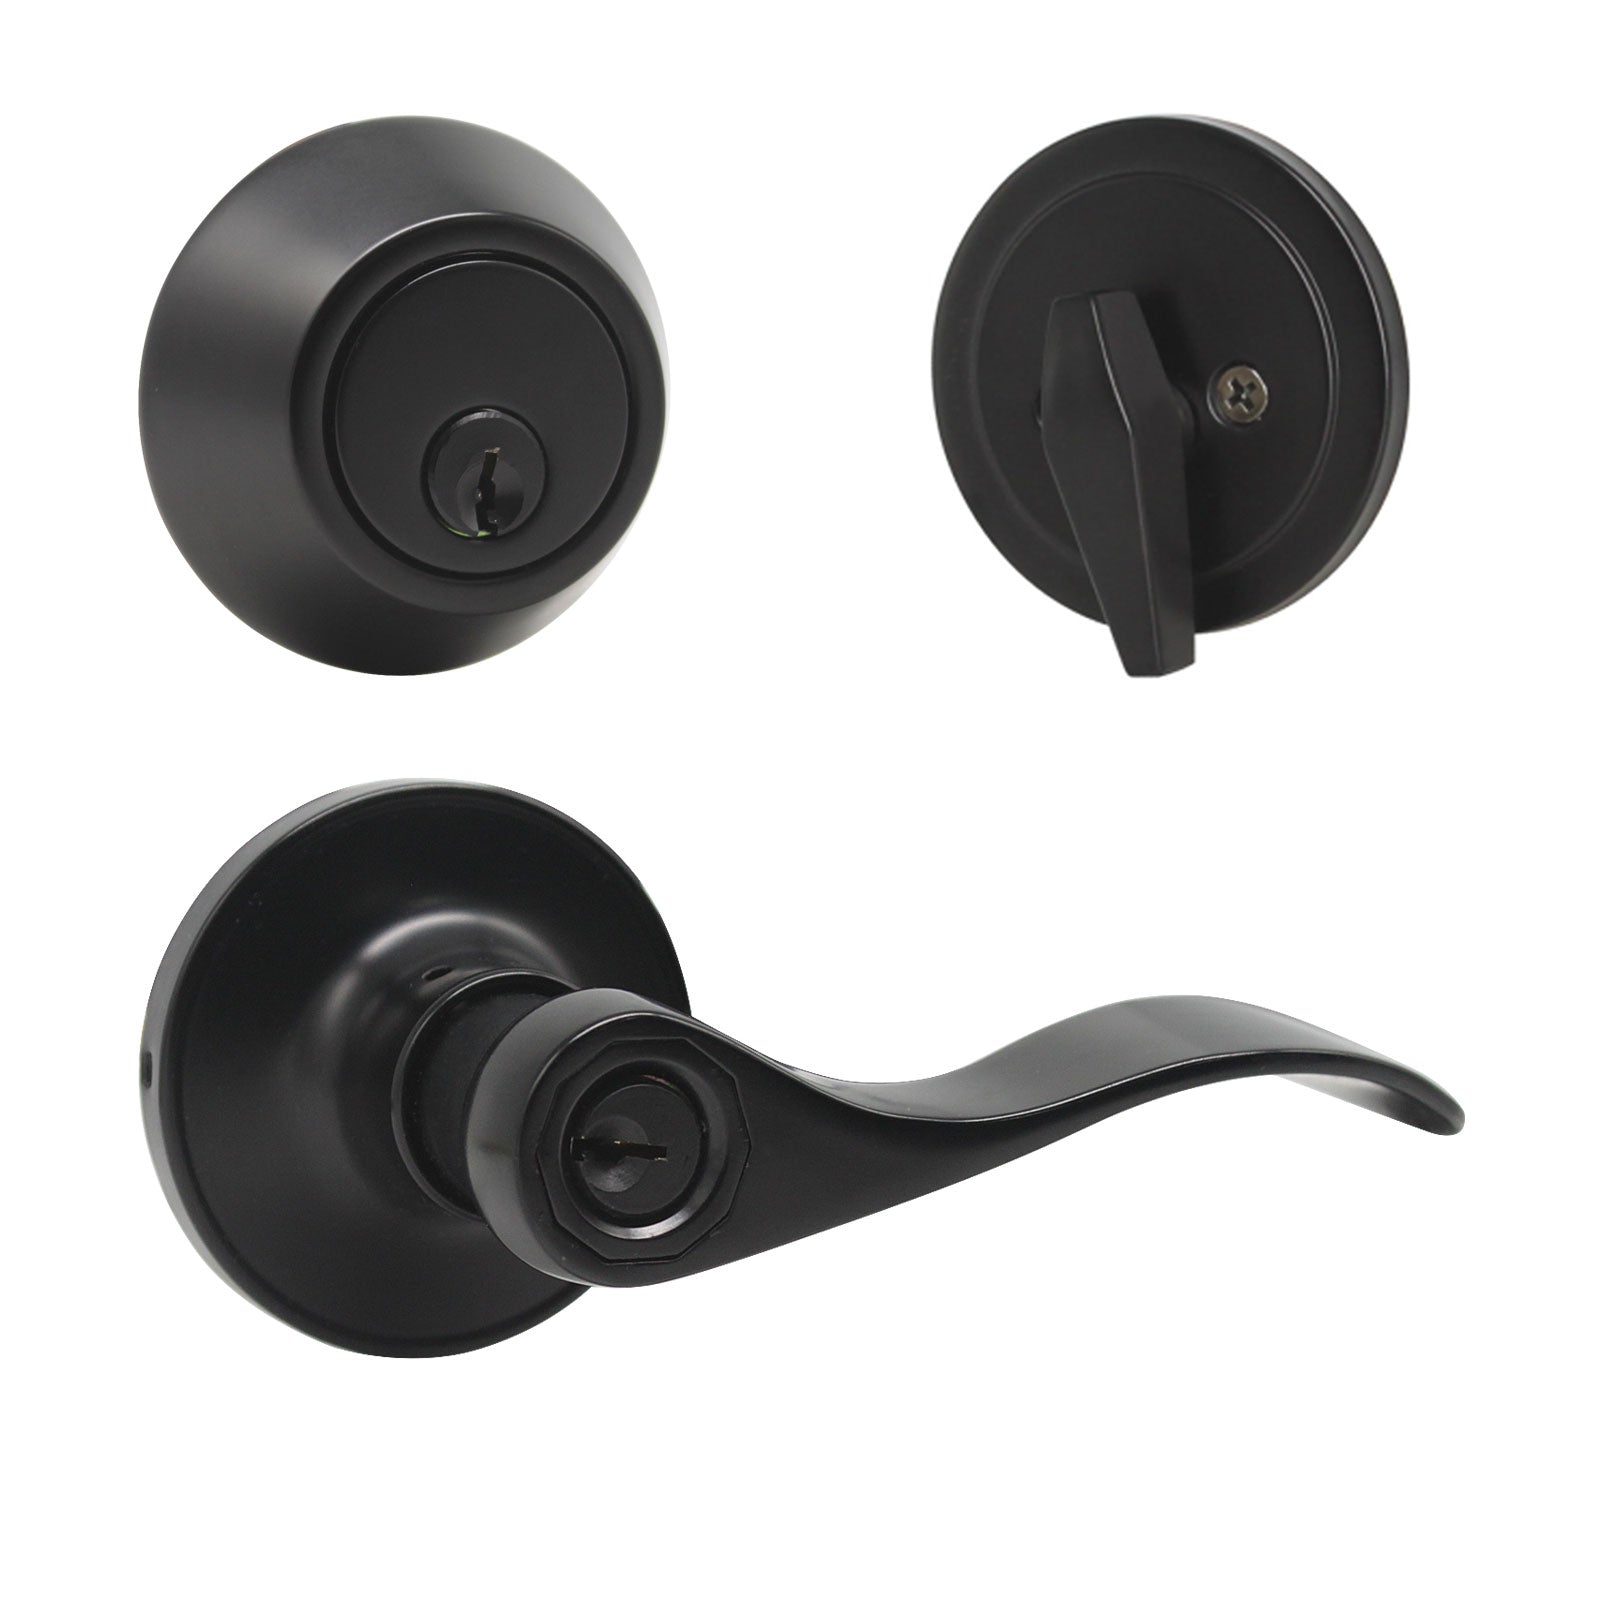 Wave Style Door Lever Lock with Single Cylinder Deadbolt Combo